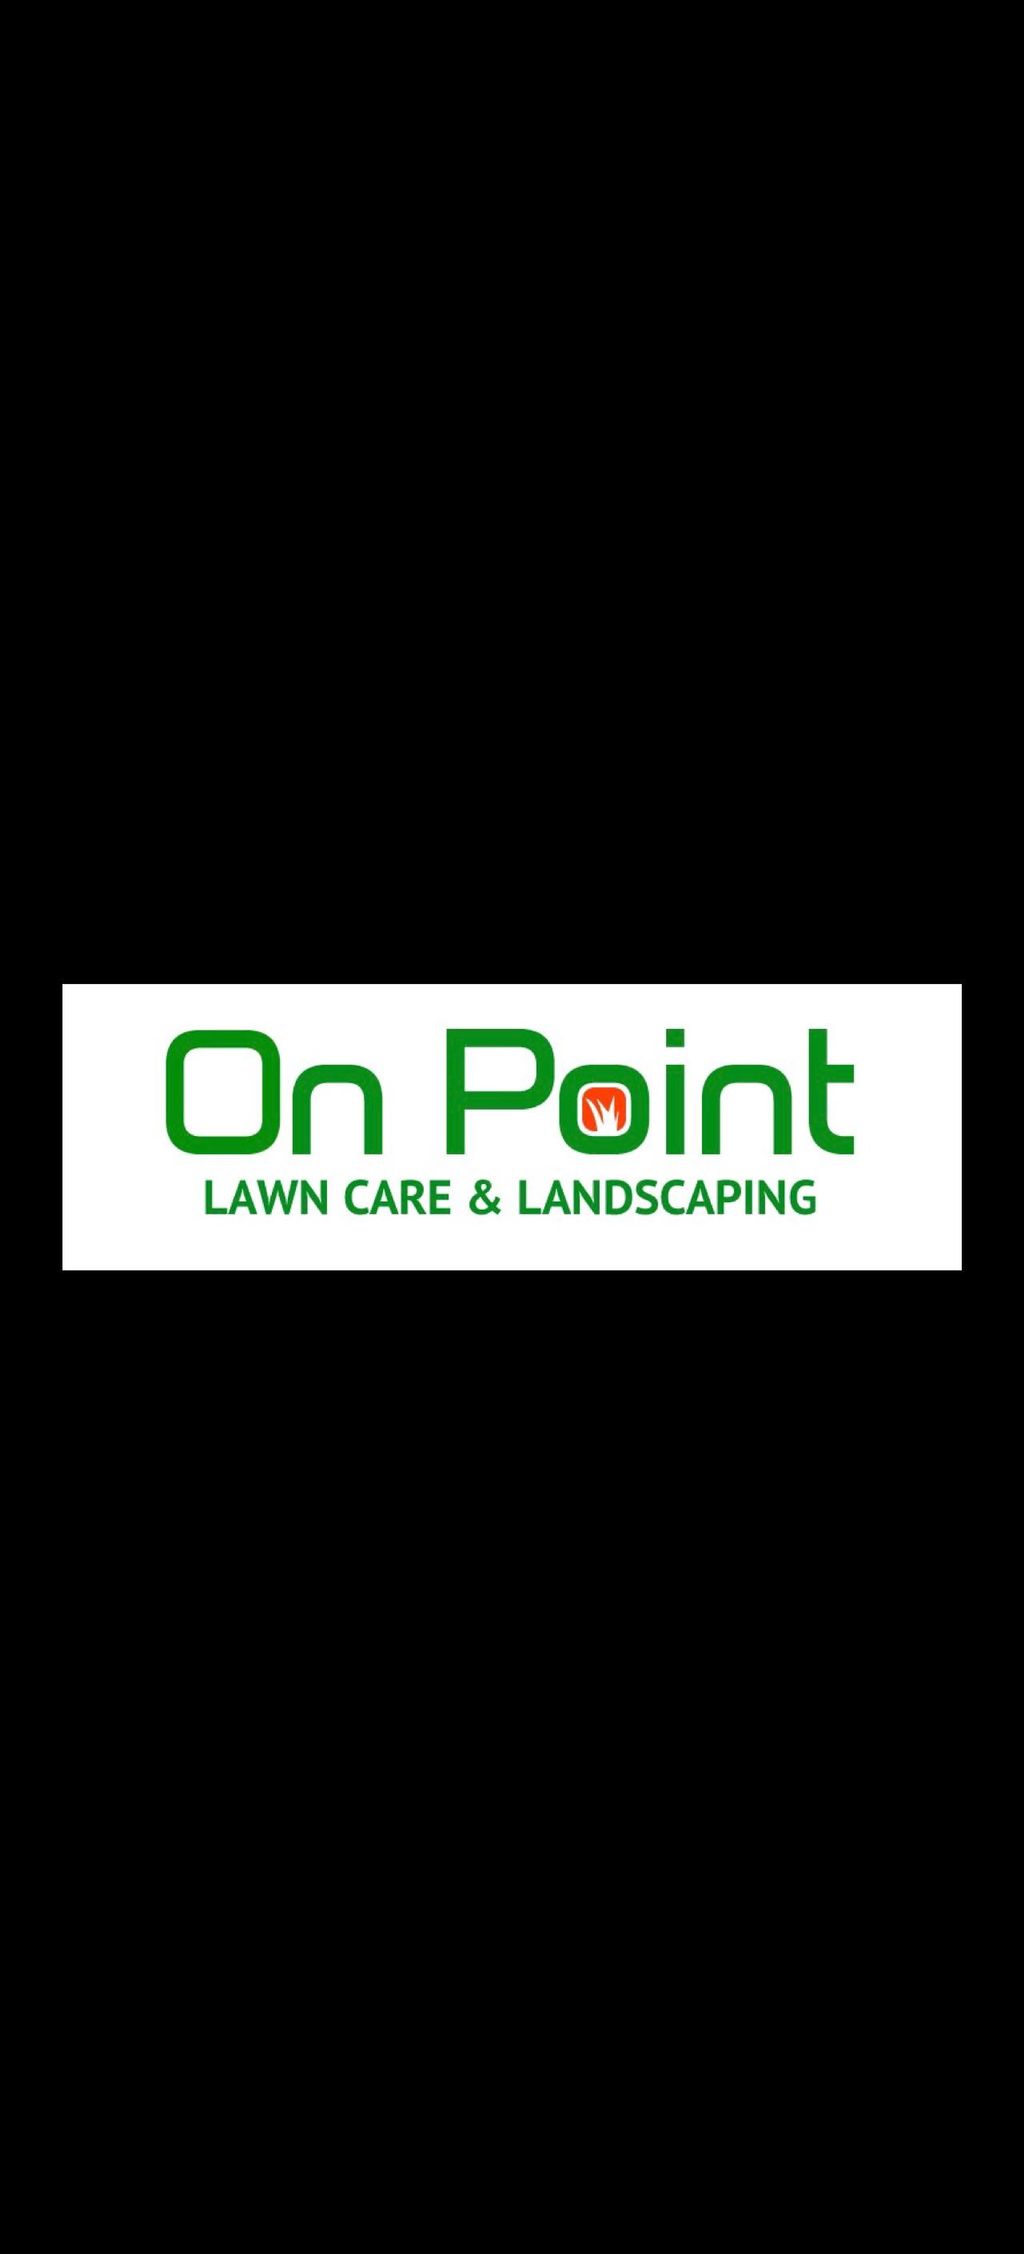 On Point Lawn Care & Landscaping